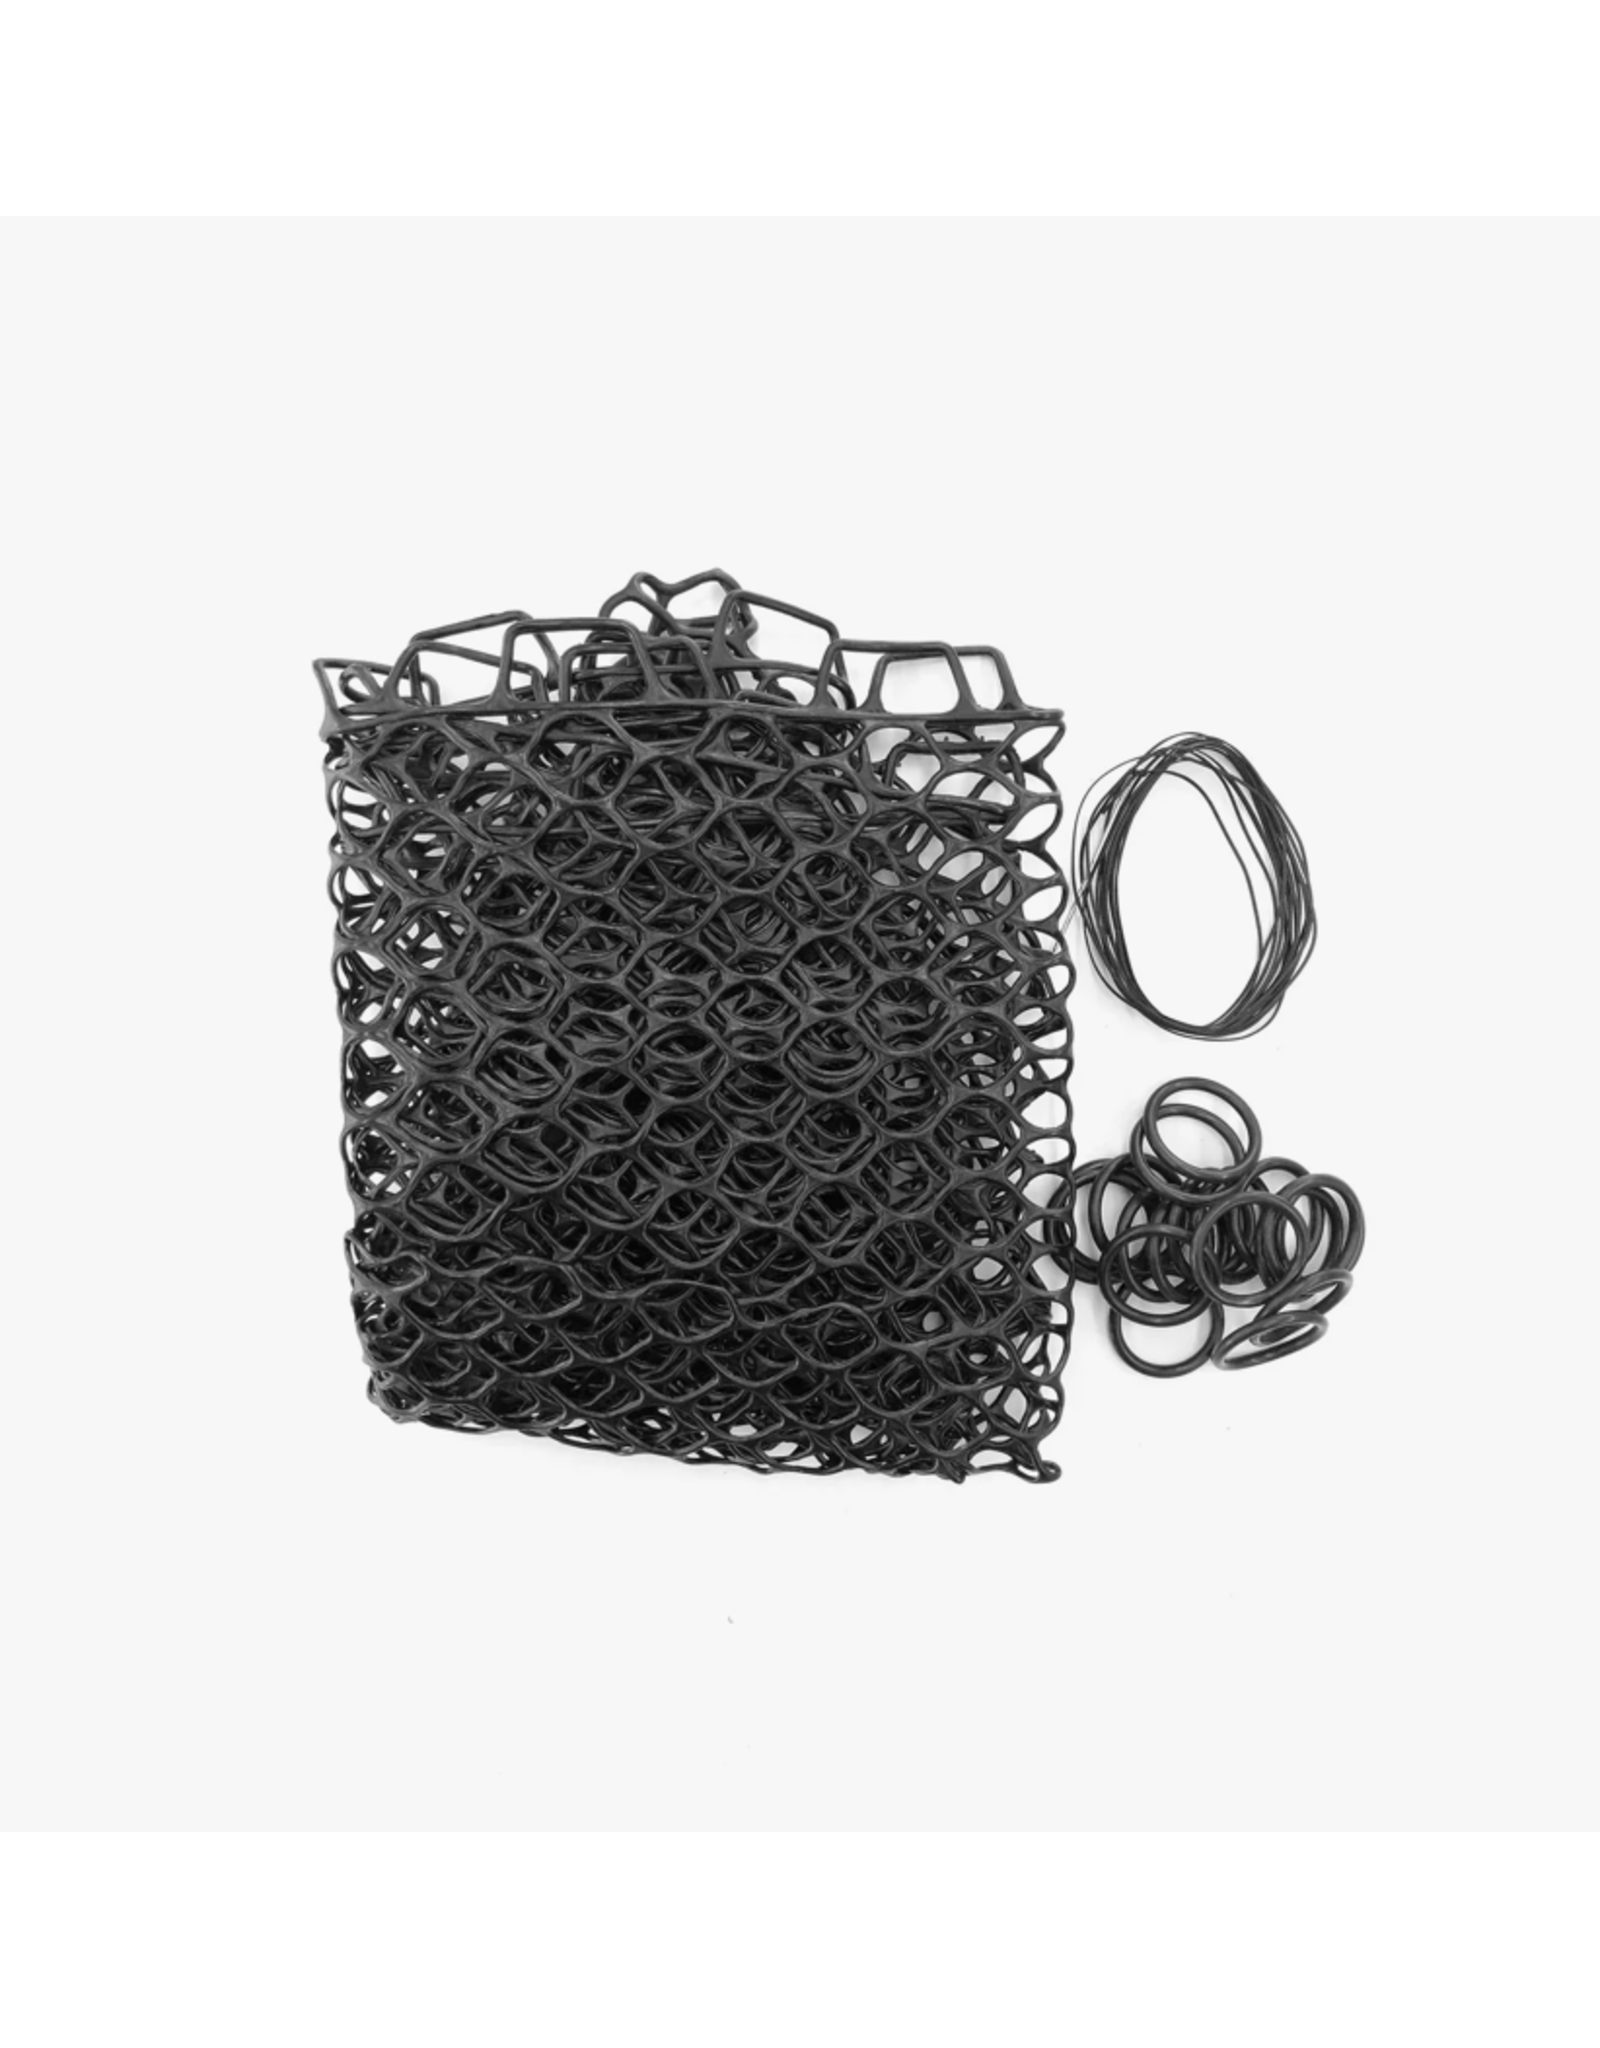 Fishpond Fishpond- Replacement Rubber Net - 19" Large Black